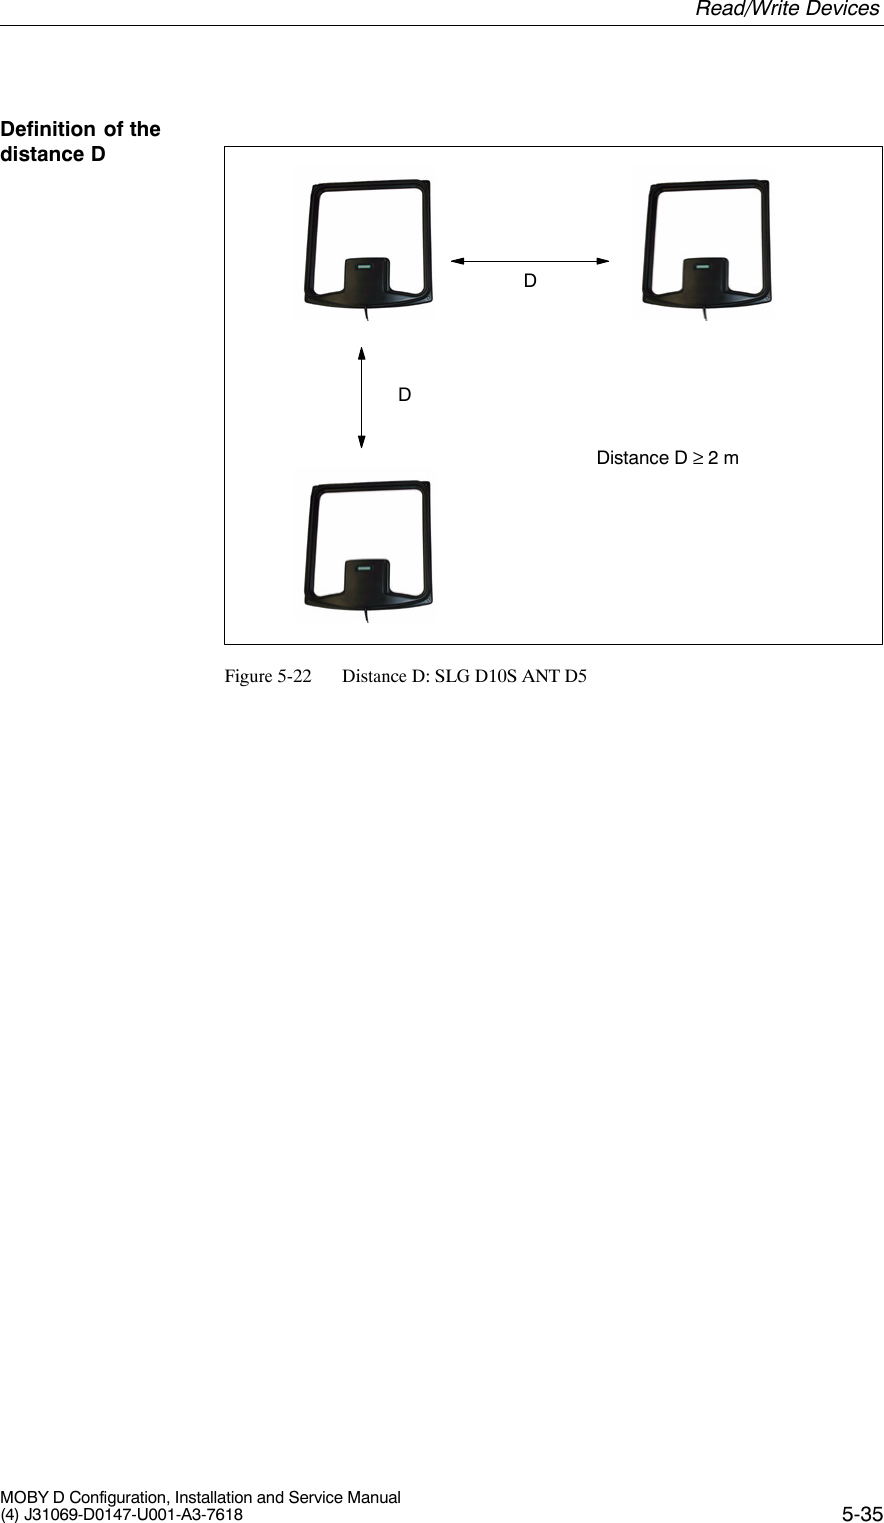 5-35MOBY D Configuration, Installation and Service Manual(4) J31069-D0147-U001-A3-7618Distance D ≥ 2 mDDFigure 5-22 Distance D: SLG D10S ANT D5Definition of thedistance DRead/Write Devices